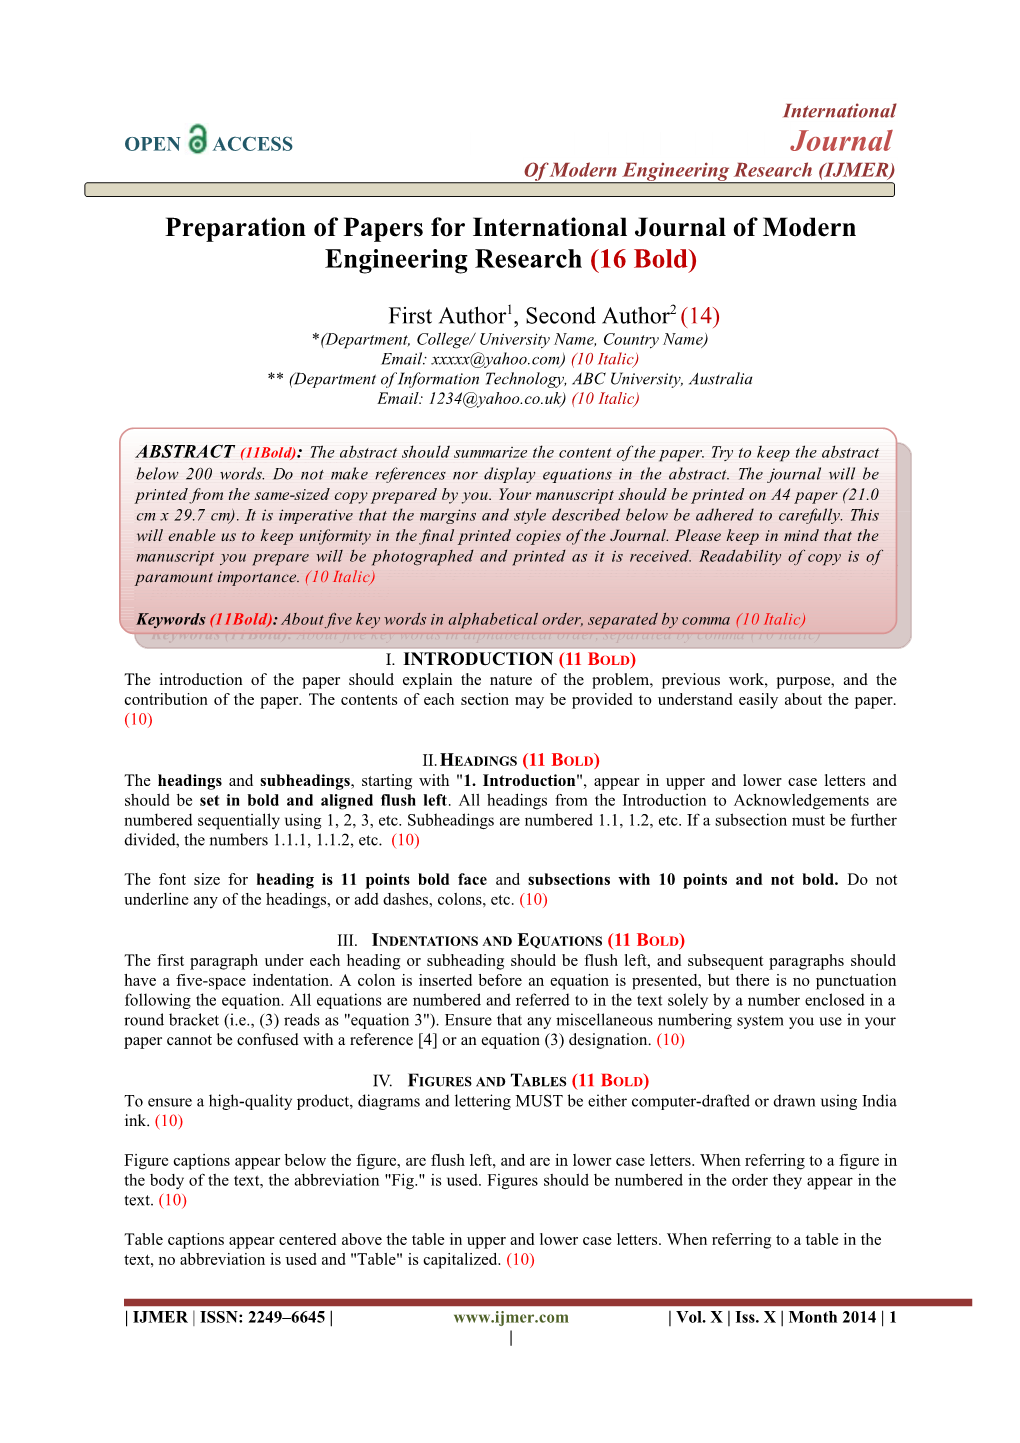 Preparation of Papers for International Journal of Modern Engineering Research (16 Bold)